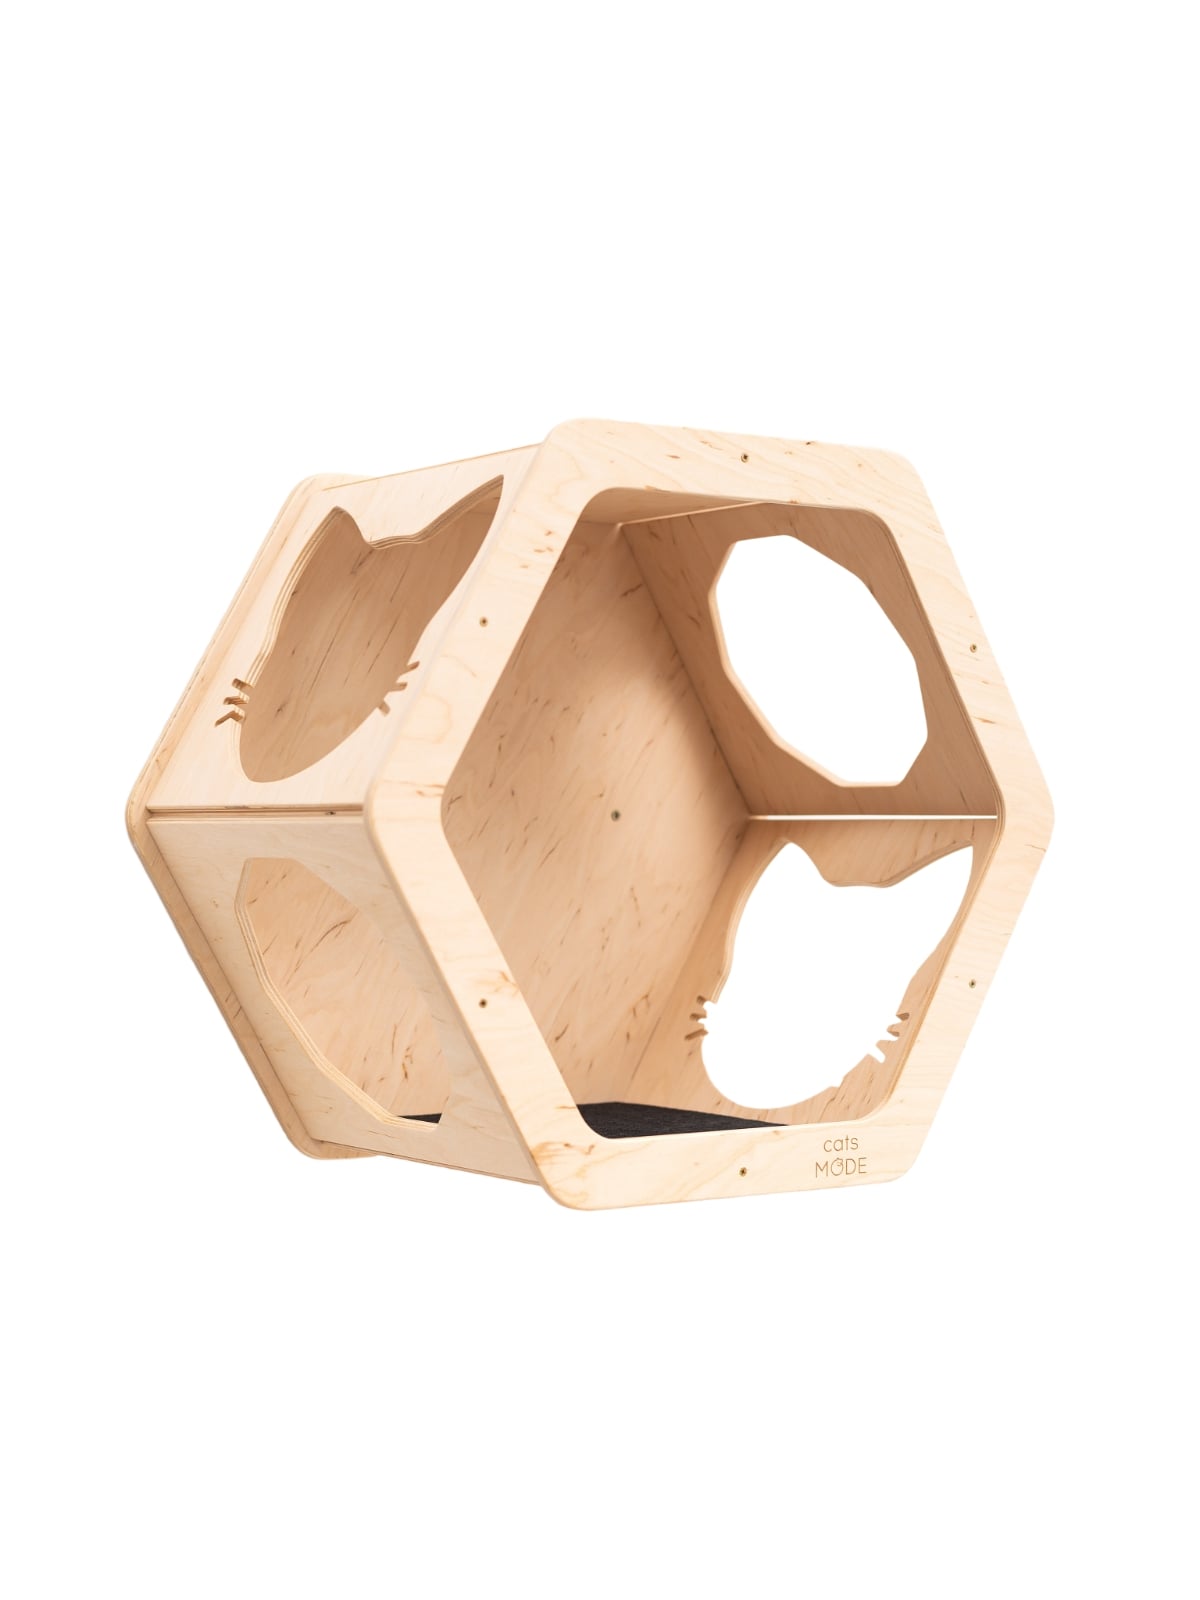 hexagonal wall shelves in light color made from wood